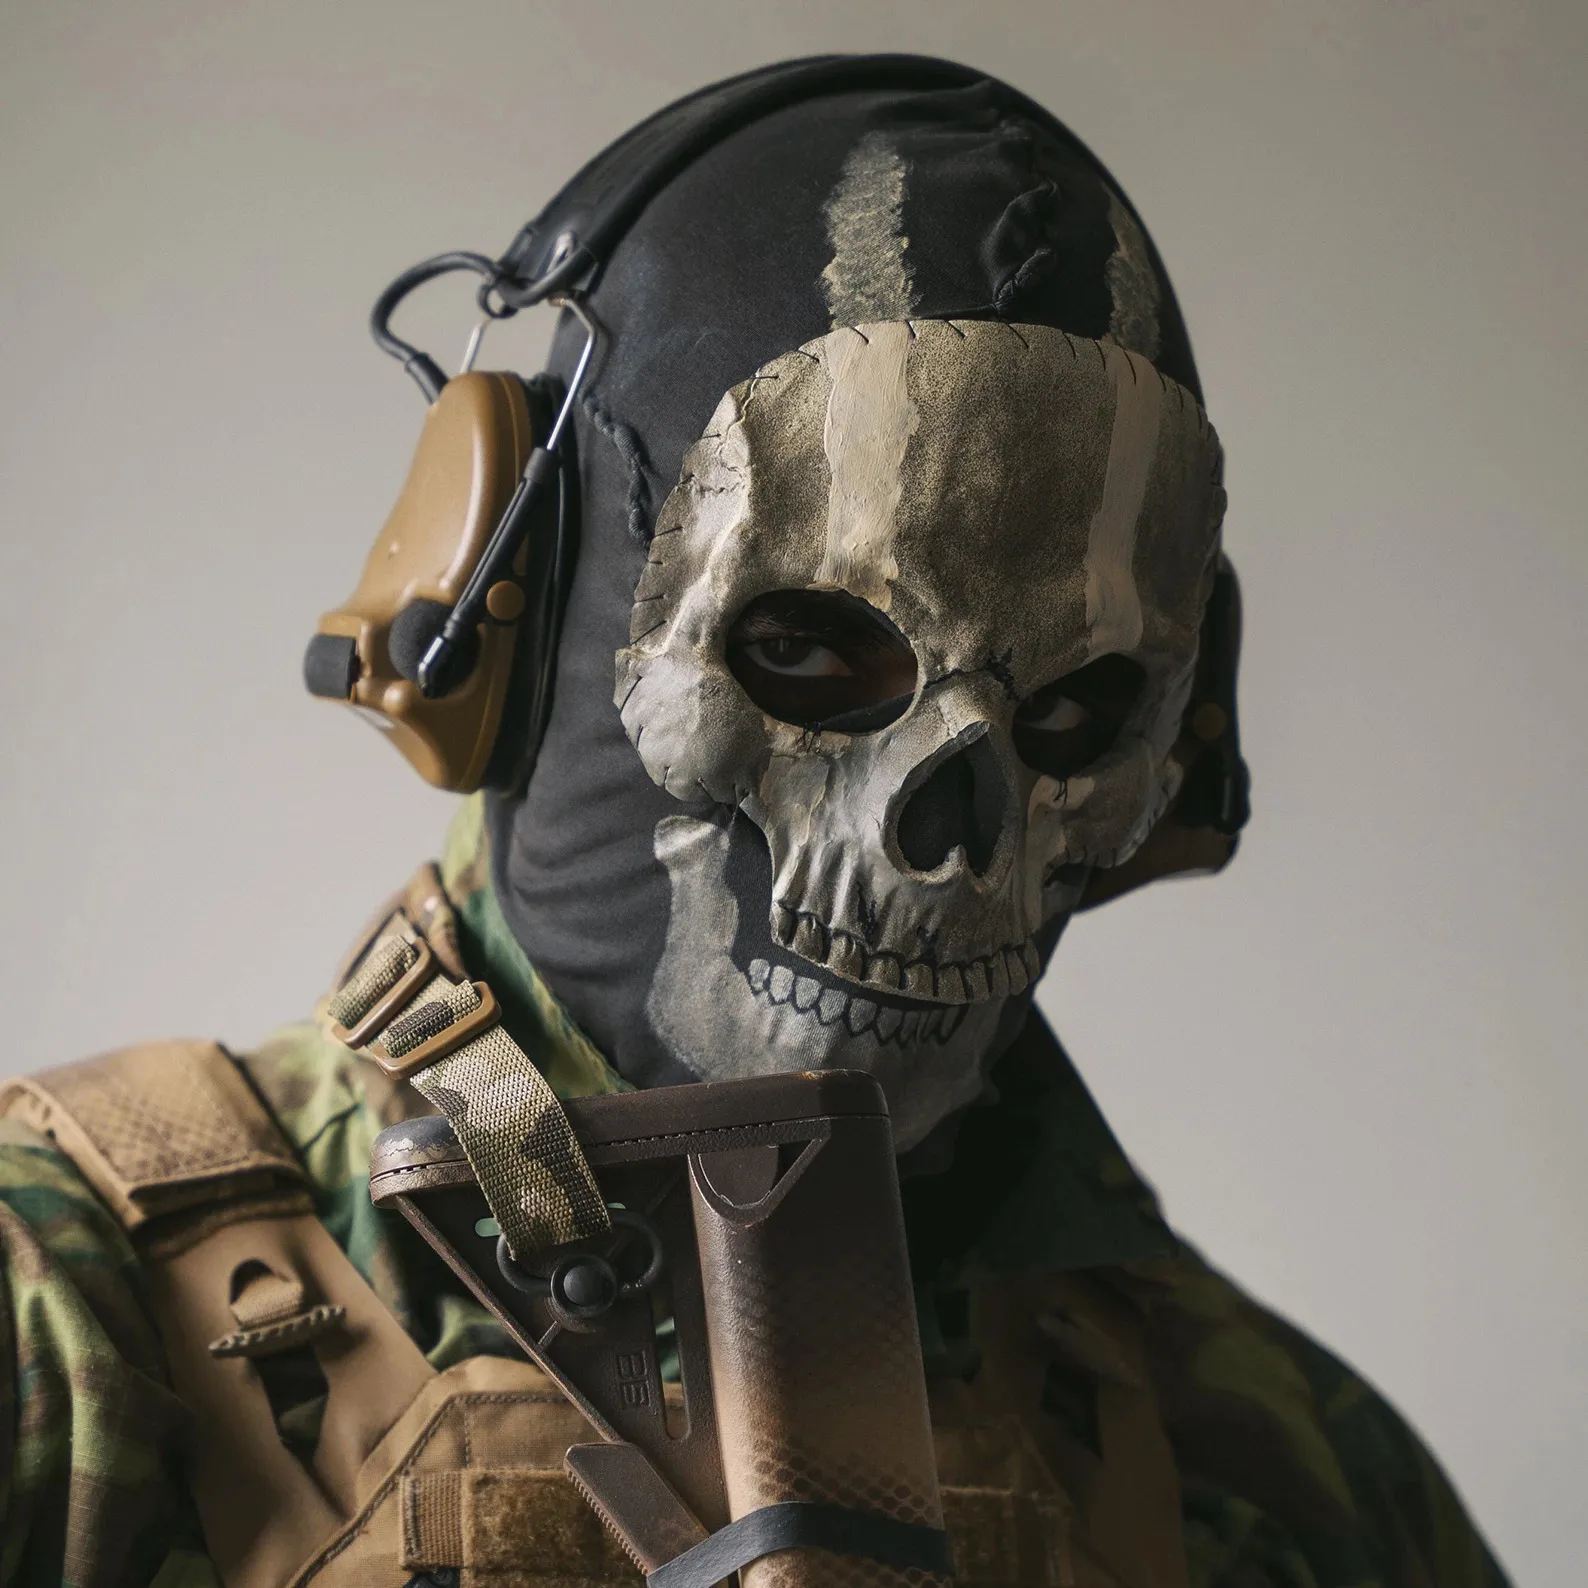 Prop House] Making Ghost's Mask (COD:MW 2019) 